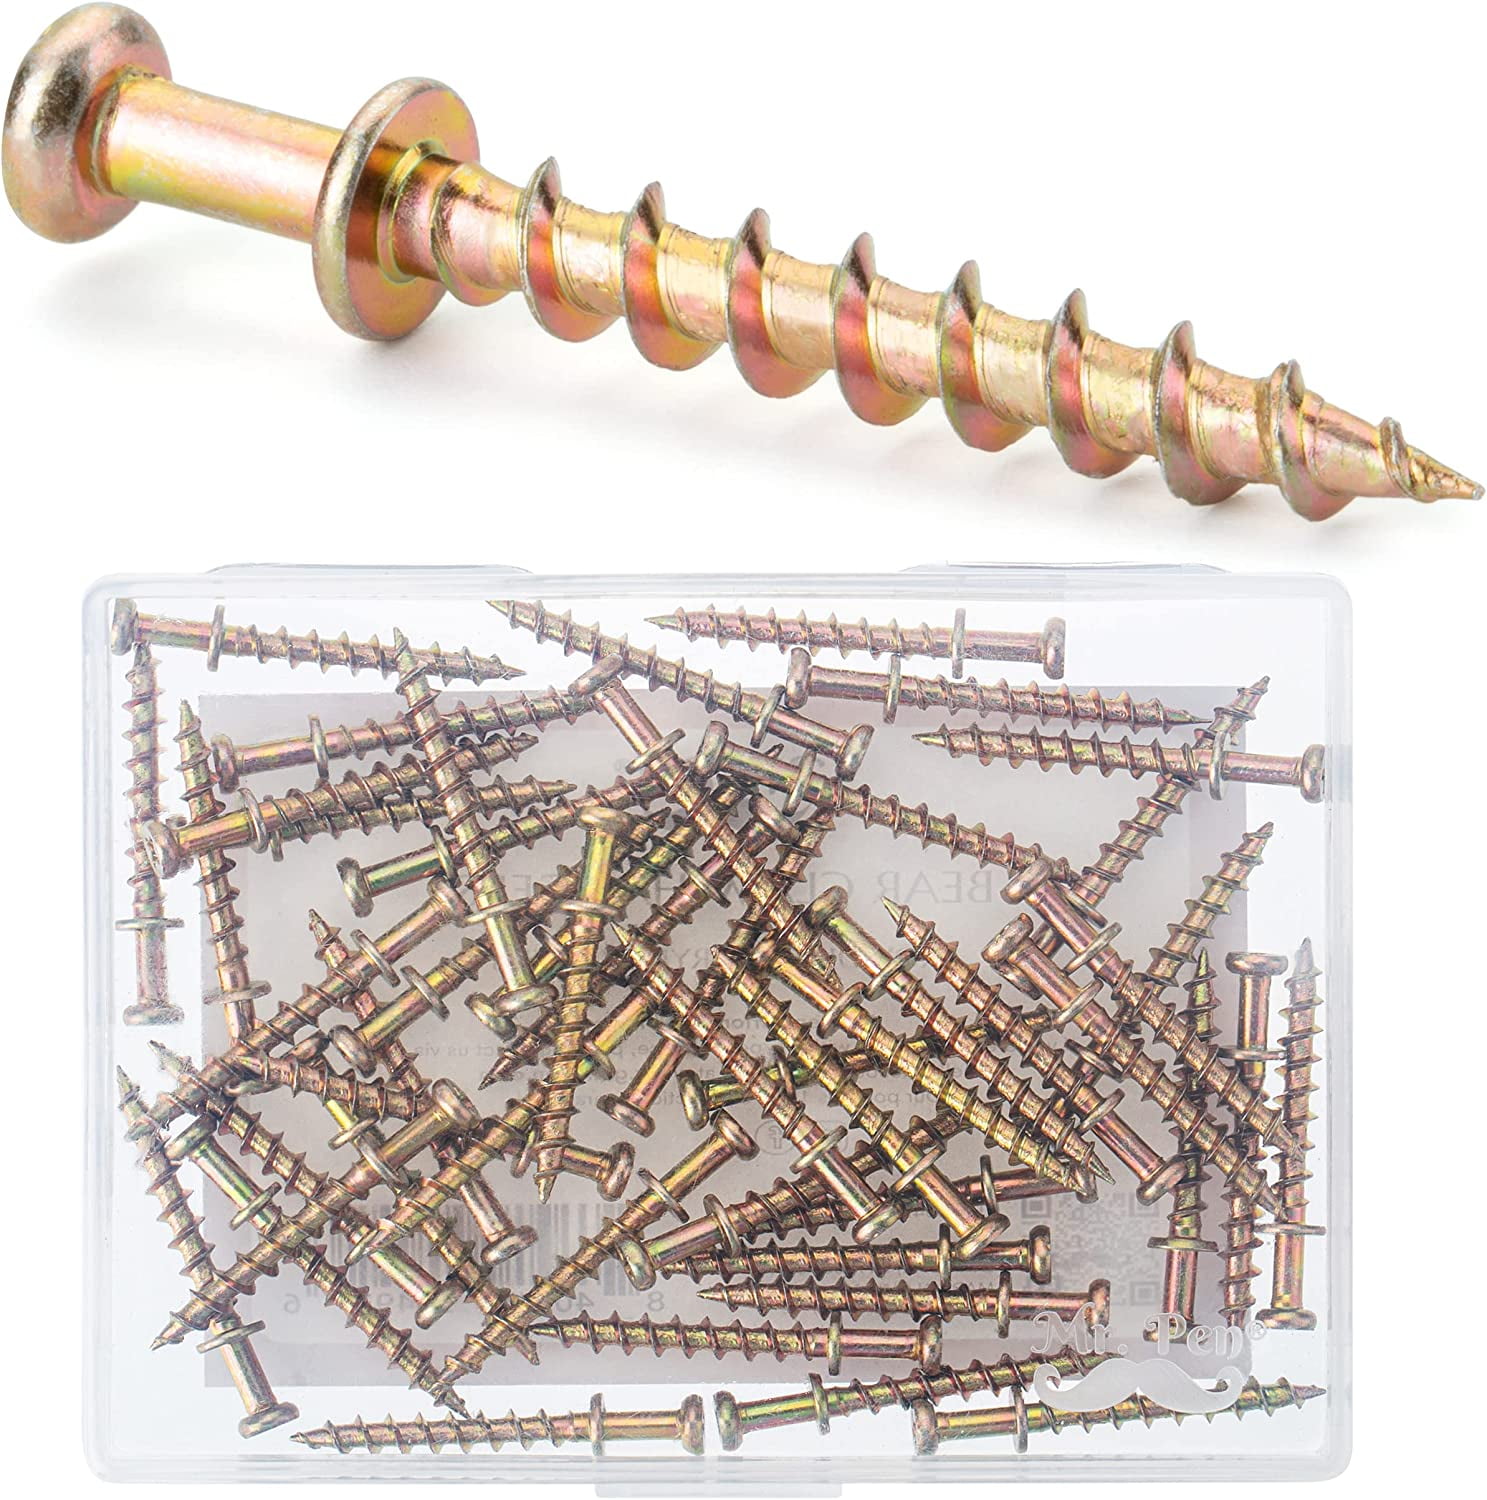 Bear Claw Screw Hanger Gold - 30lb Picture Hooks - 4-in-1 Hanging Screws  for D-Rings, Sawtooth, Wire and Keyholes - Mounts in Drywall and Wood Studs  30 Pack 